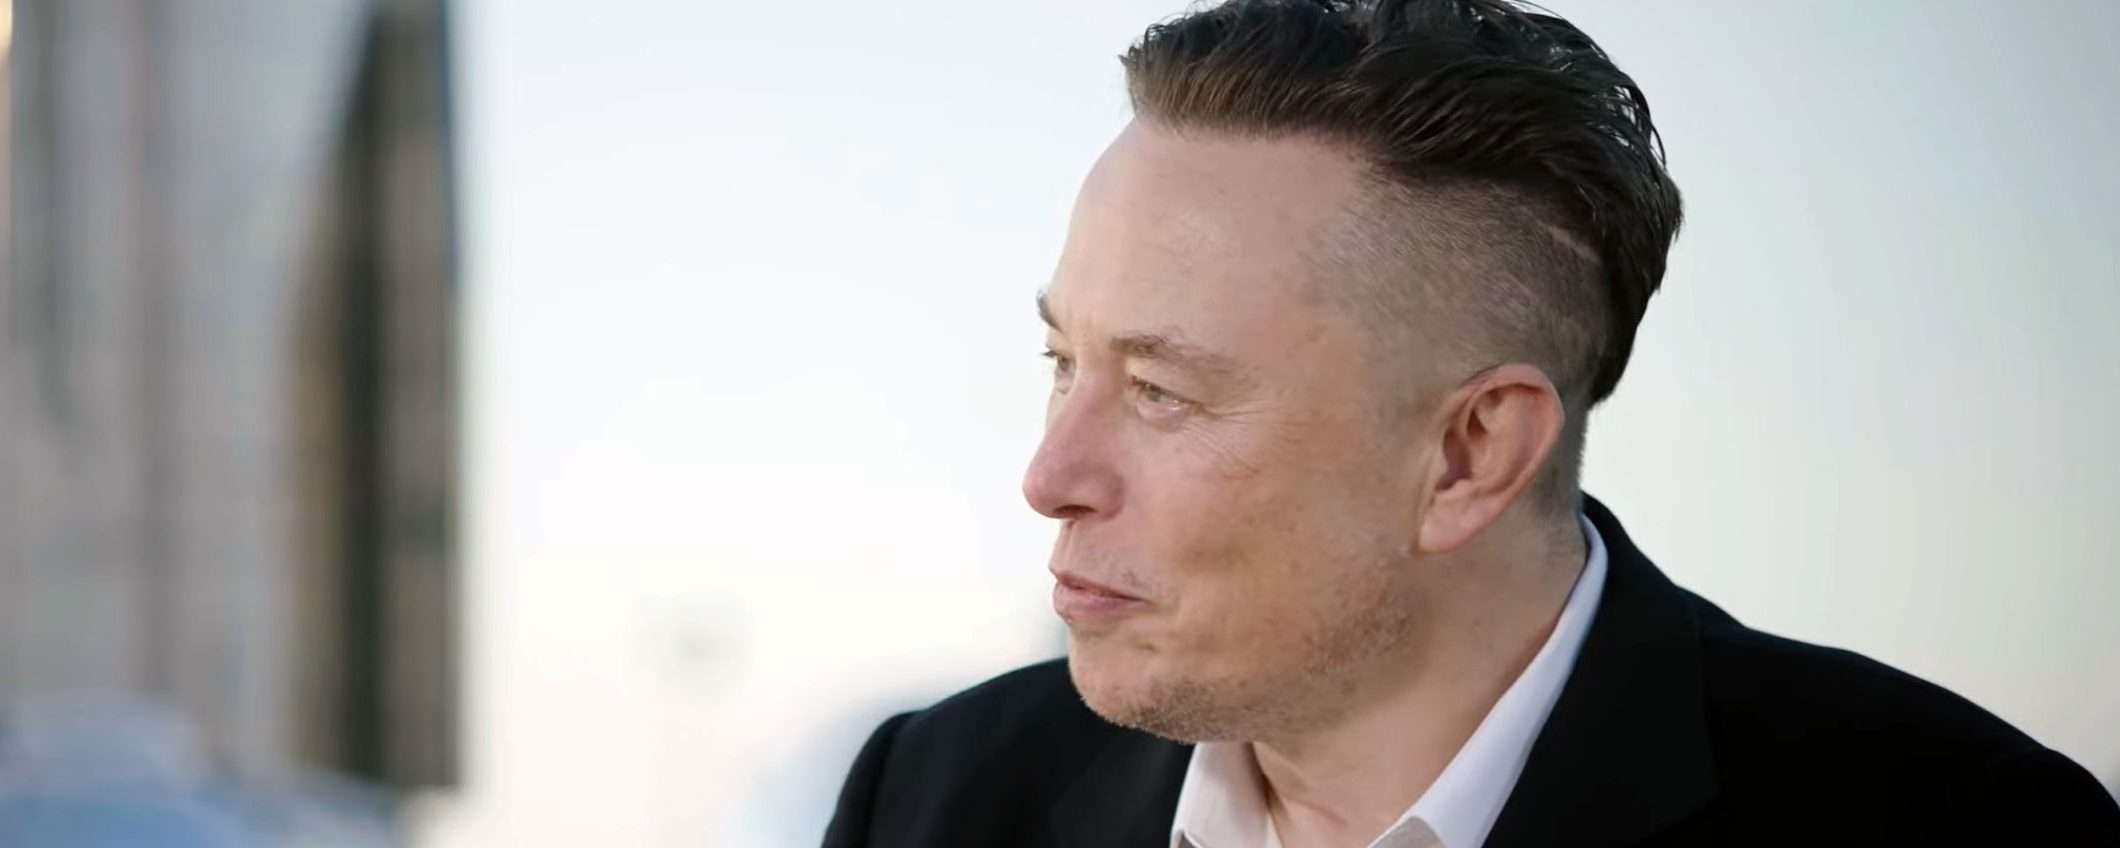 Elon Musk: per TIME è Person of the Year